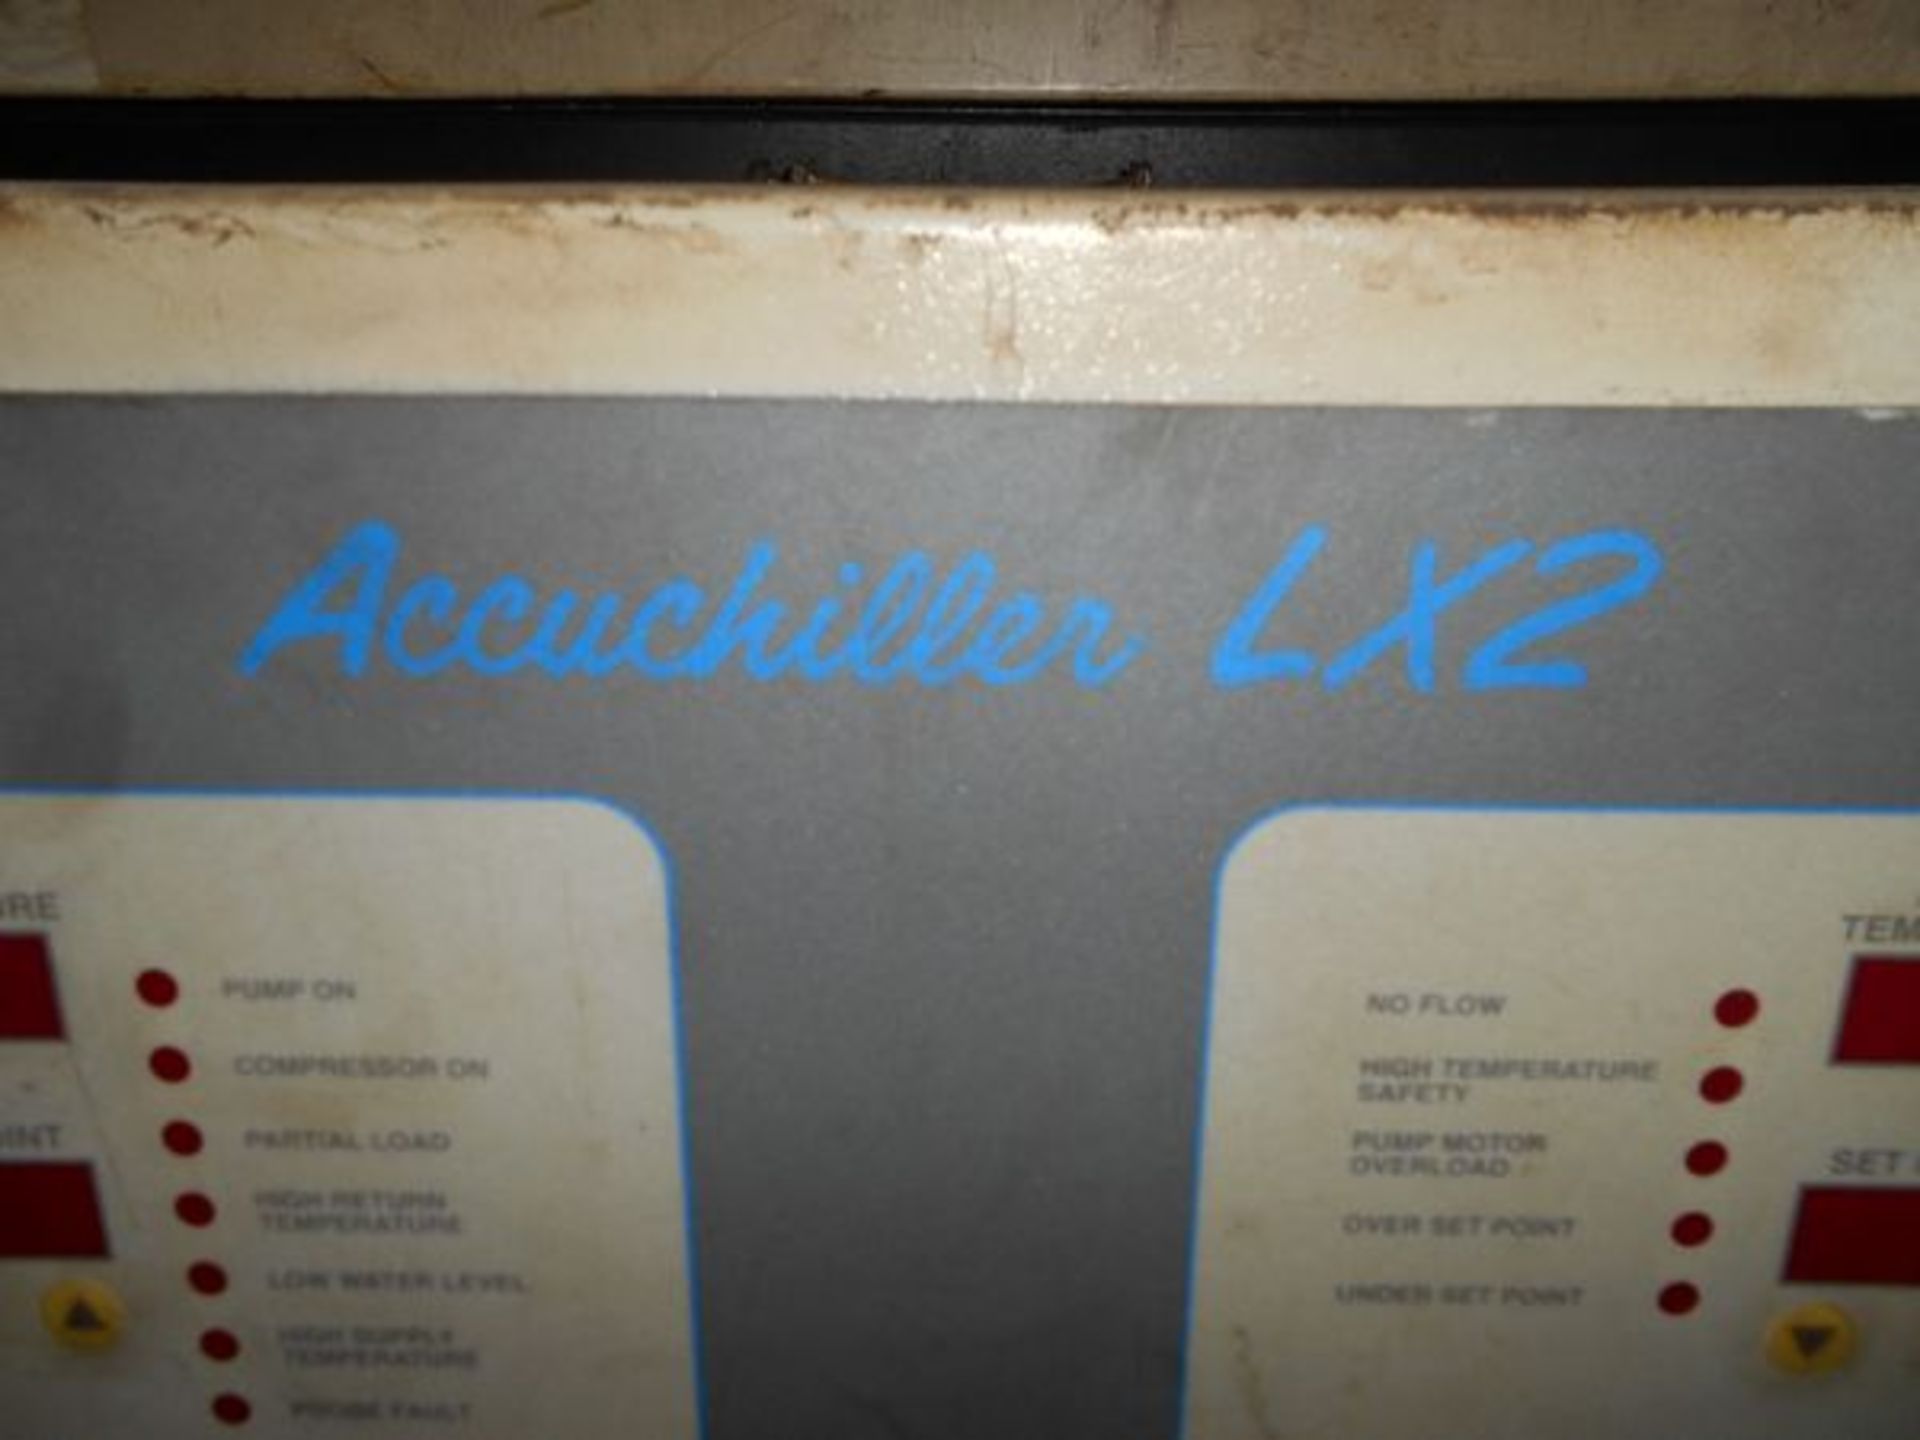 ACCUCHILLER THERMAL CARE MODEL HQ2A16LX2